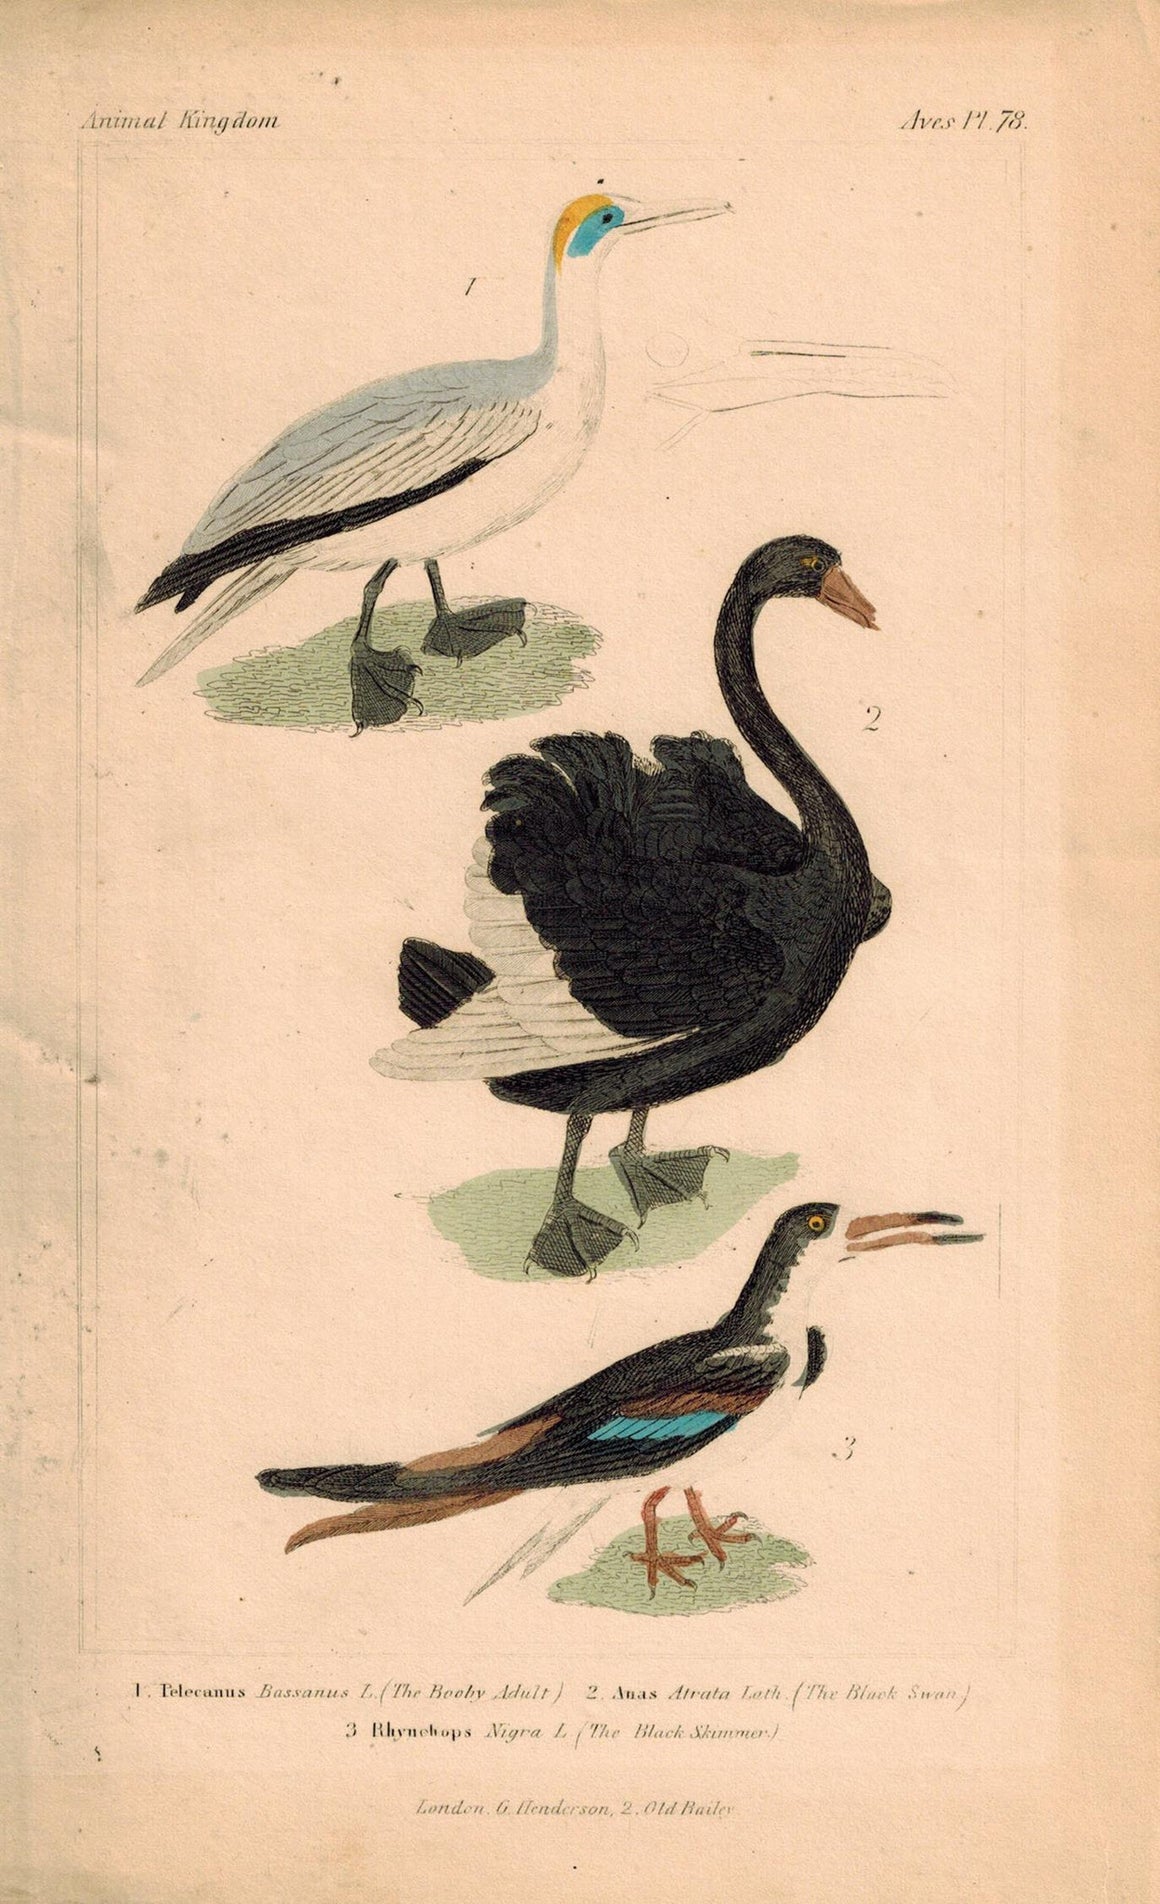 Adult Booby Black Swan Skimmer Antique Hand Color Cuvier Bird Print 1837